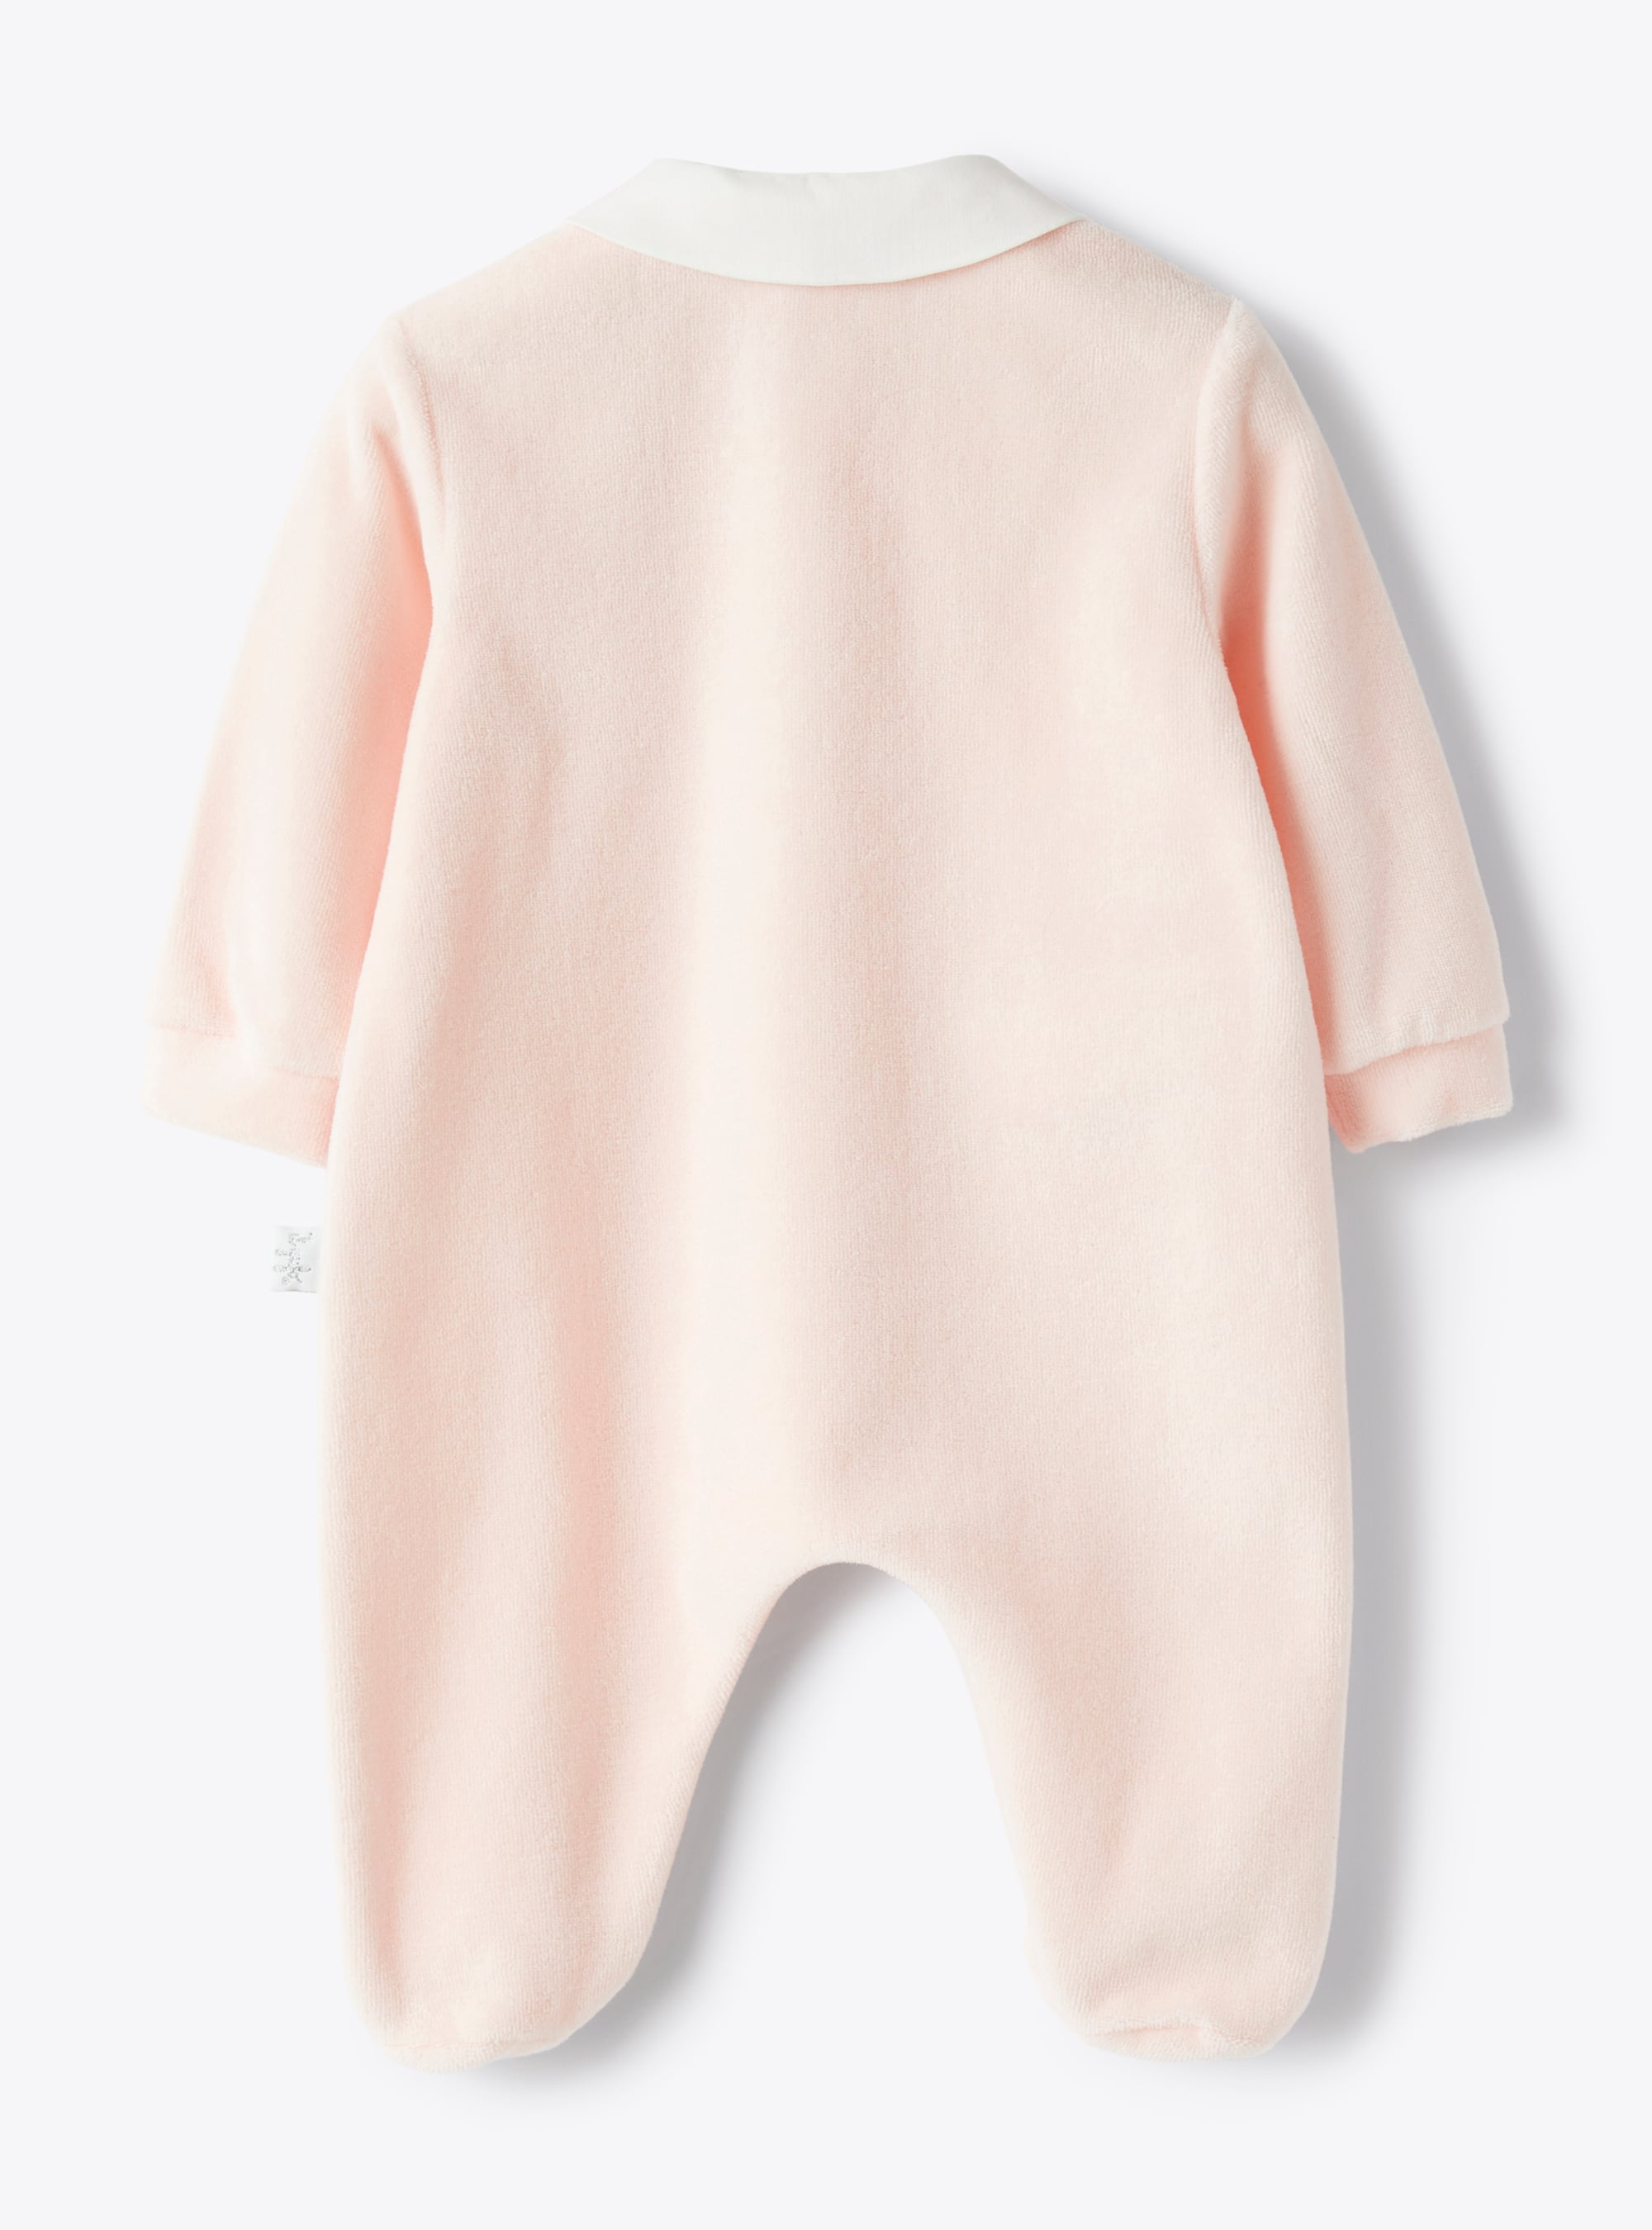 Babysuit in pink chenille with embroidered details - Pink | Il Gufo